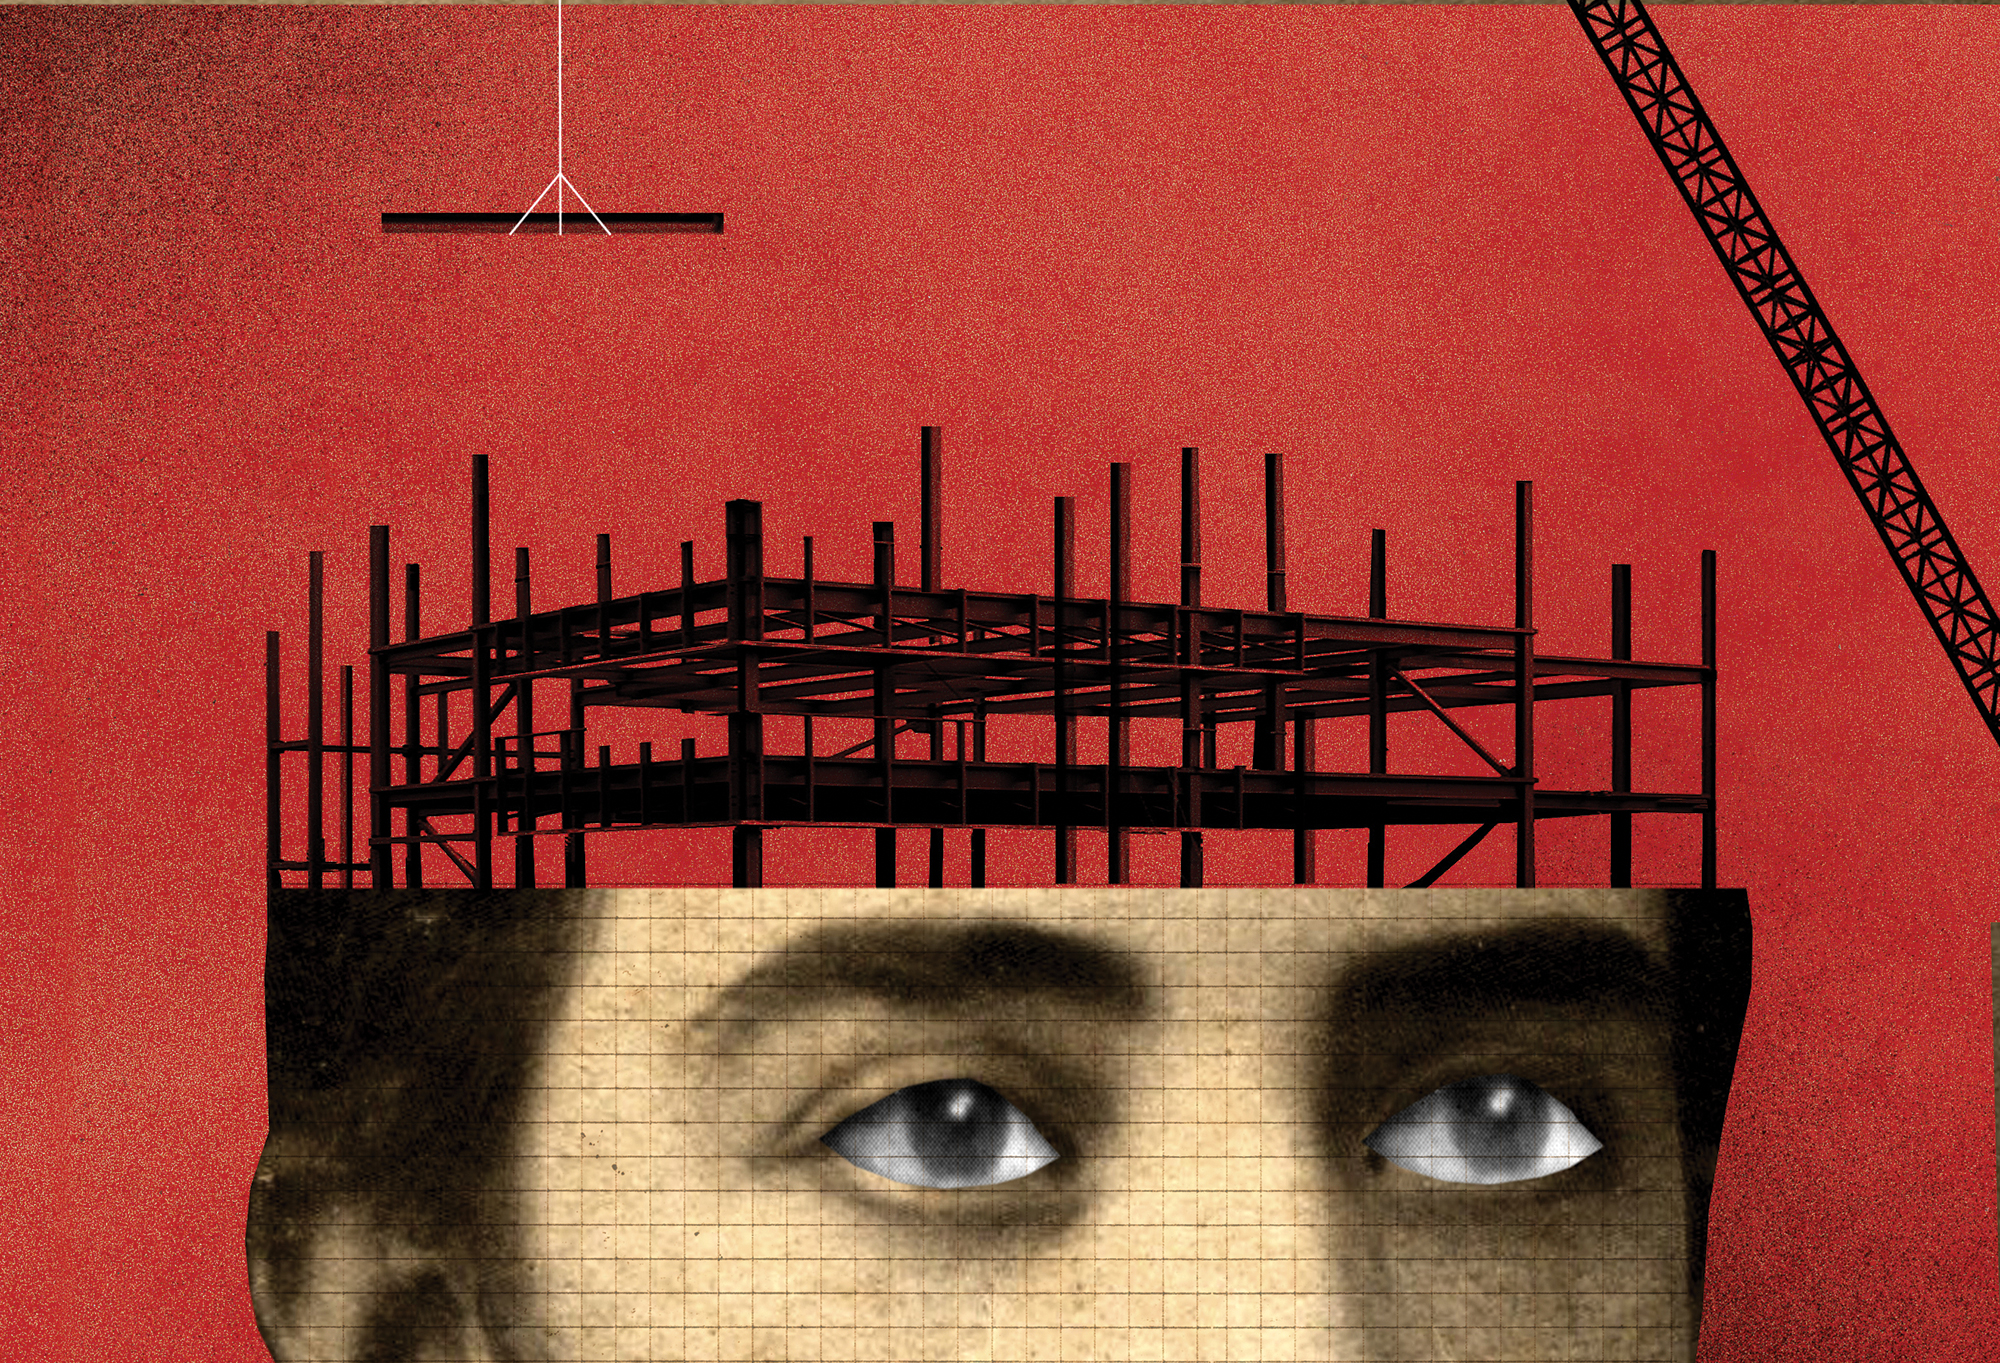 Illustration of a person's head with the top removed, exposing a metal foundation like that of a large building.